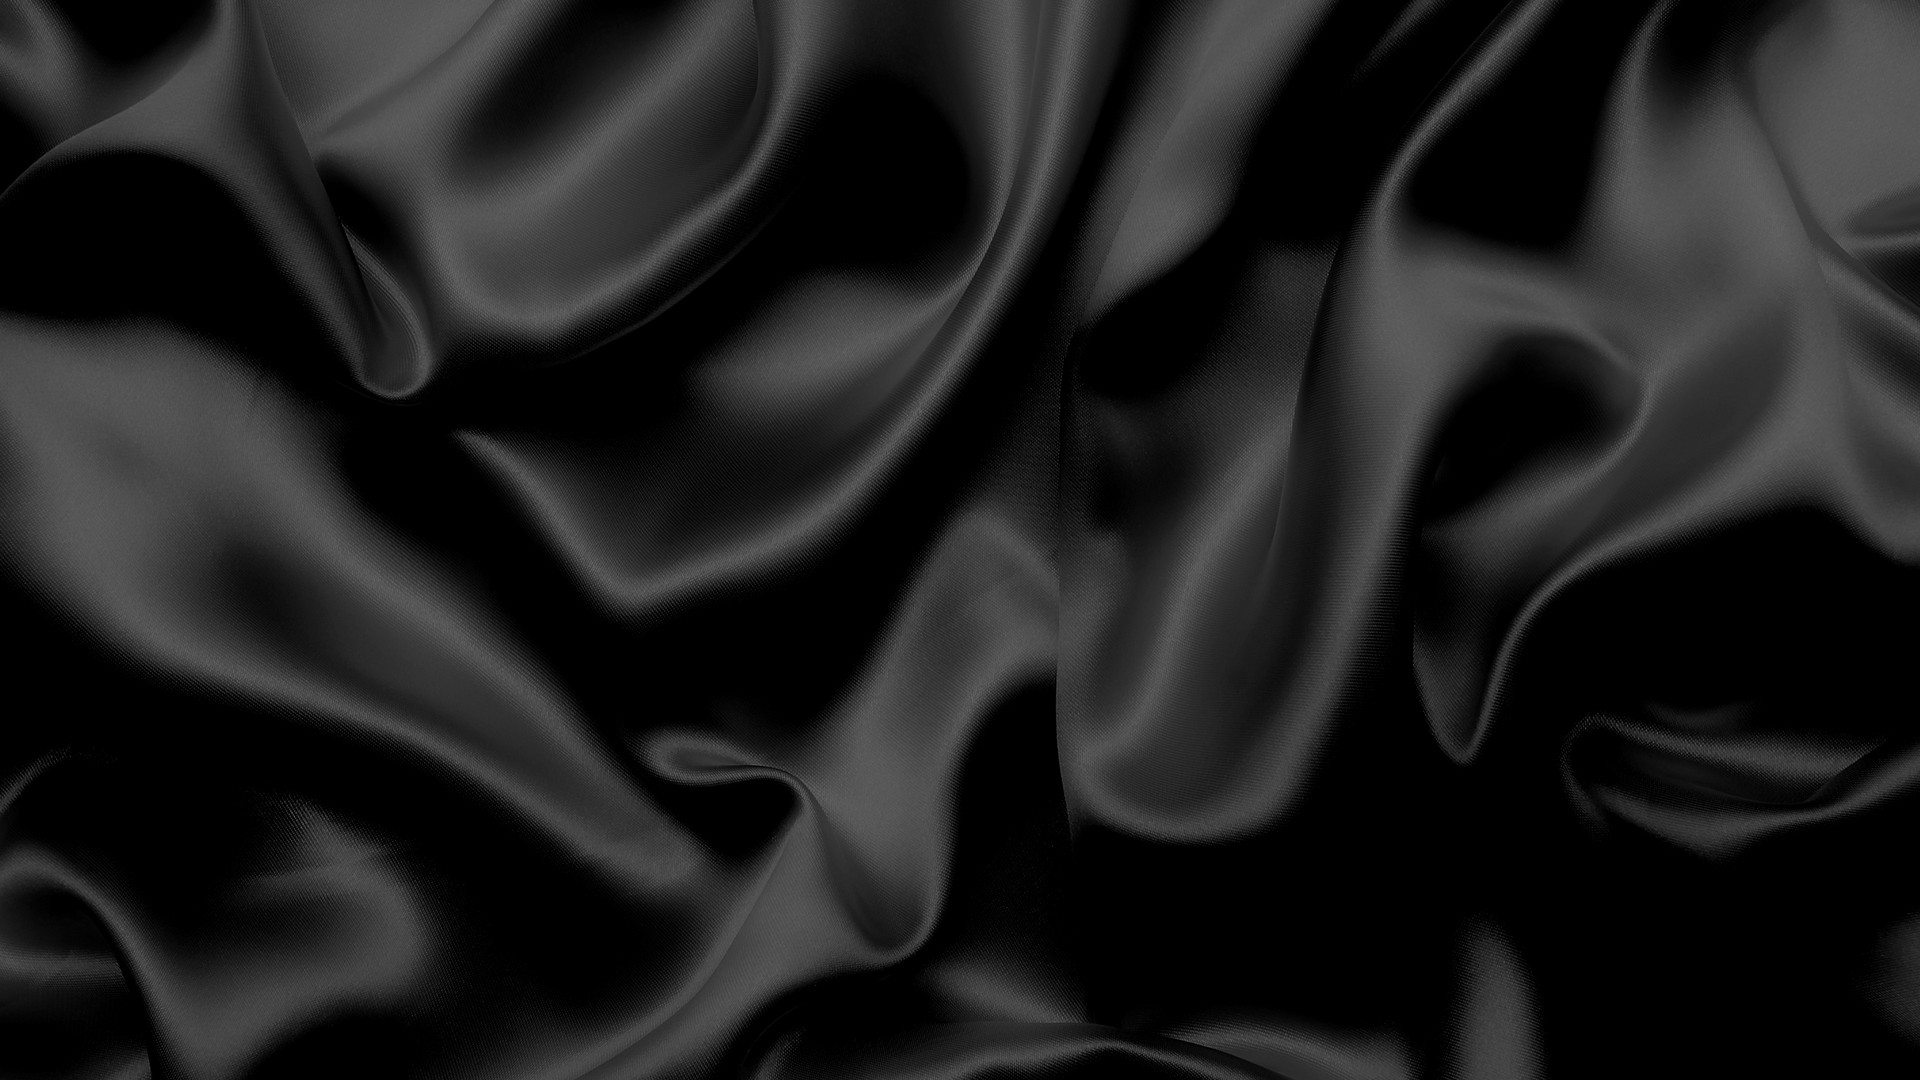 Best Black Silk Wallpaper HD with high-resolution 1920x1080 pixel. You can use this wallpaper for your Desktop Computer Backgrounds, Mac Wallpapers, Android Lock screen or iPhone Screensavers and another smartphone device